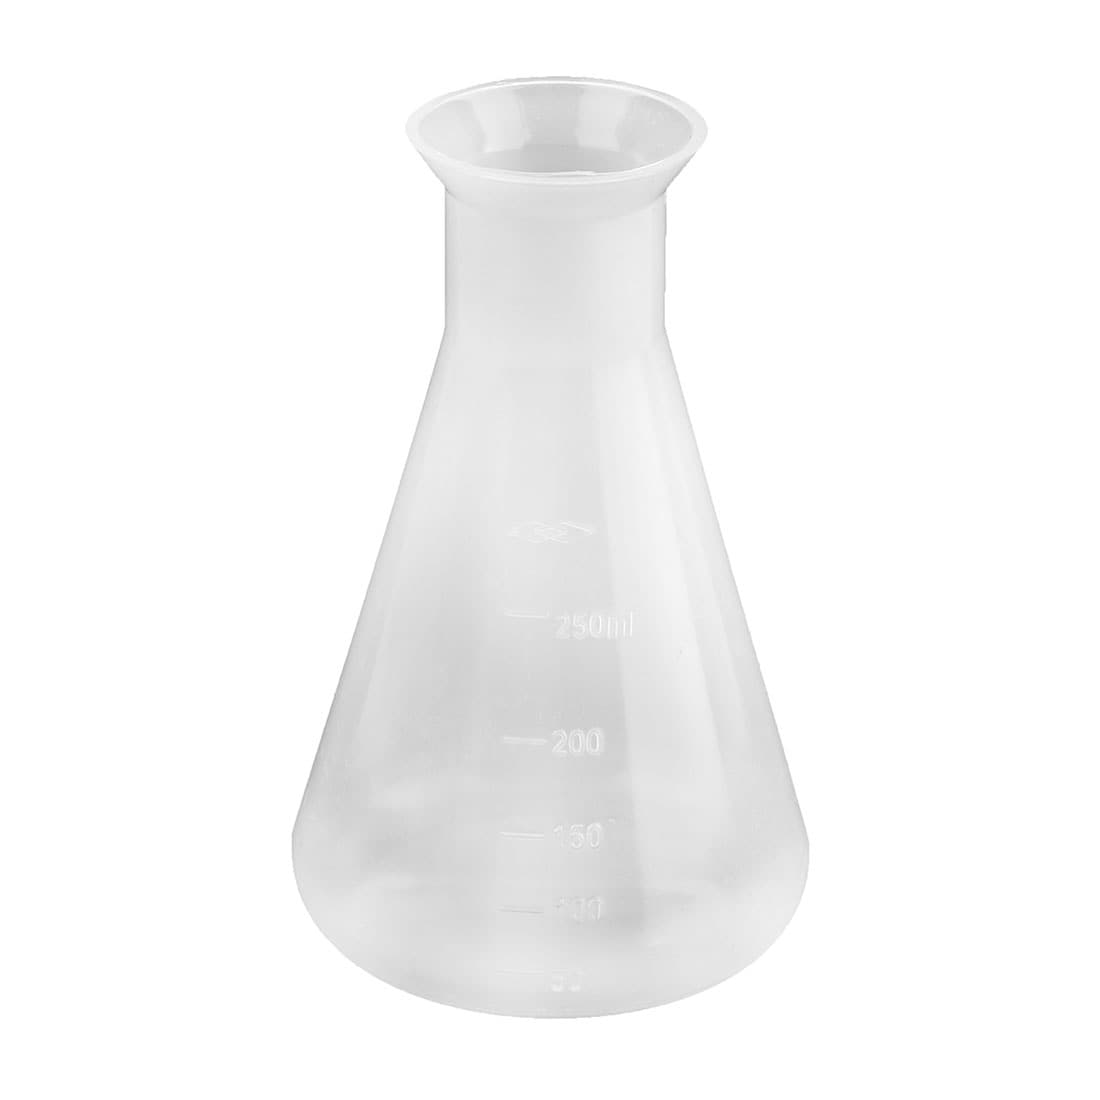 https://ak1.ostkcdn.com/images/products/is/images/direct/fca18f0aa0b8ef5dd93f6a25c3950a231e3f8543/Laboratory-Plastic-Water-Liquid-Container-Measuring-Cup-Beaker-250ml.jpg